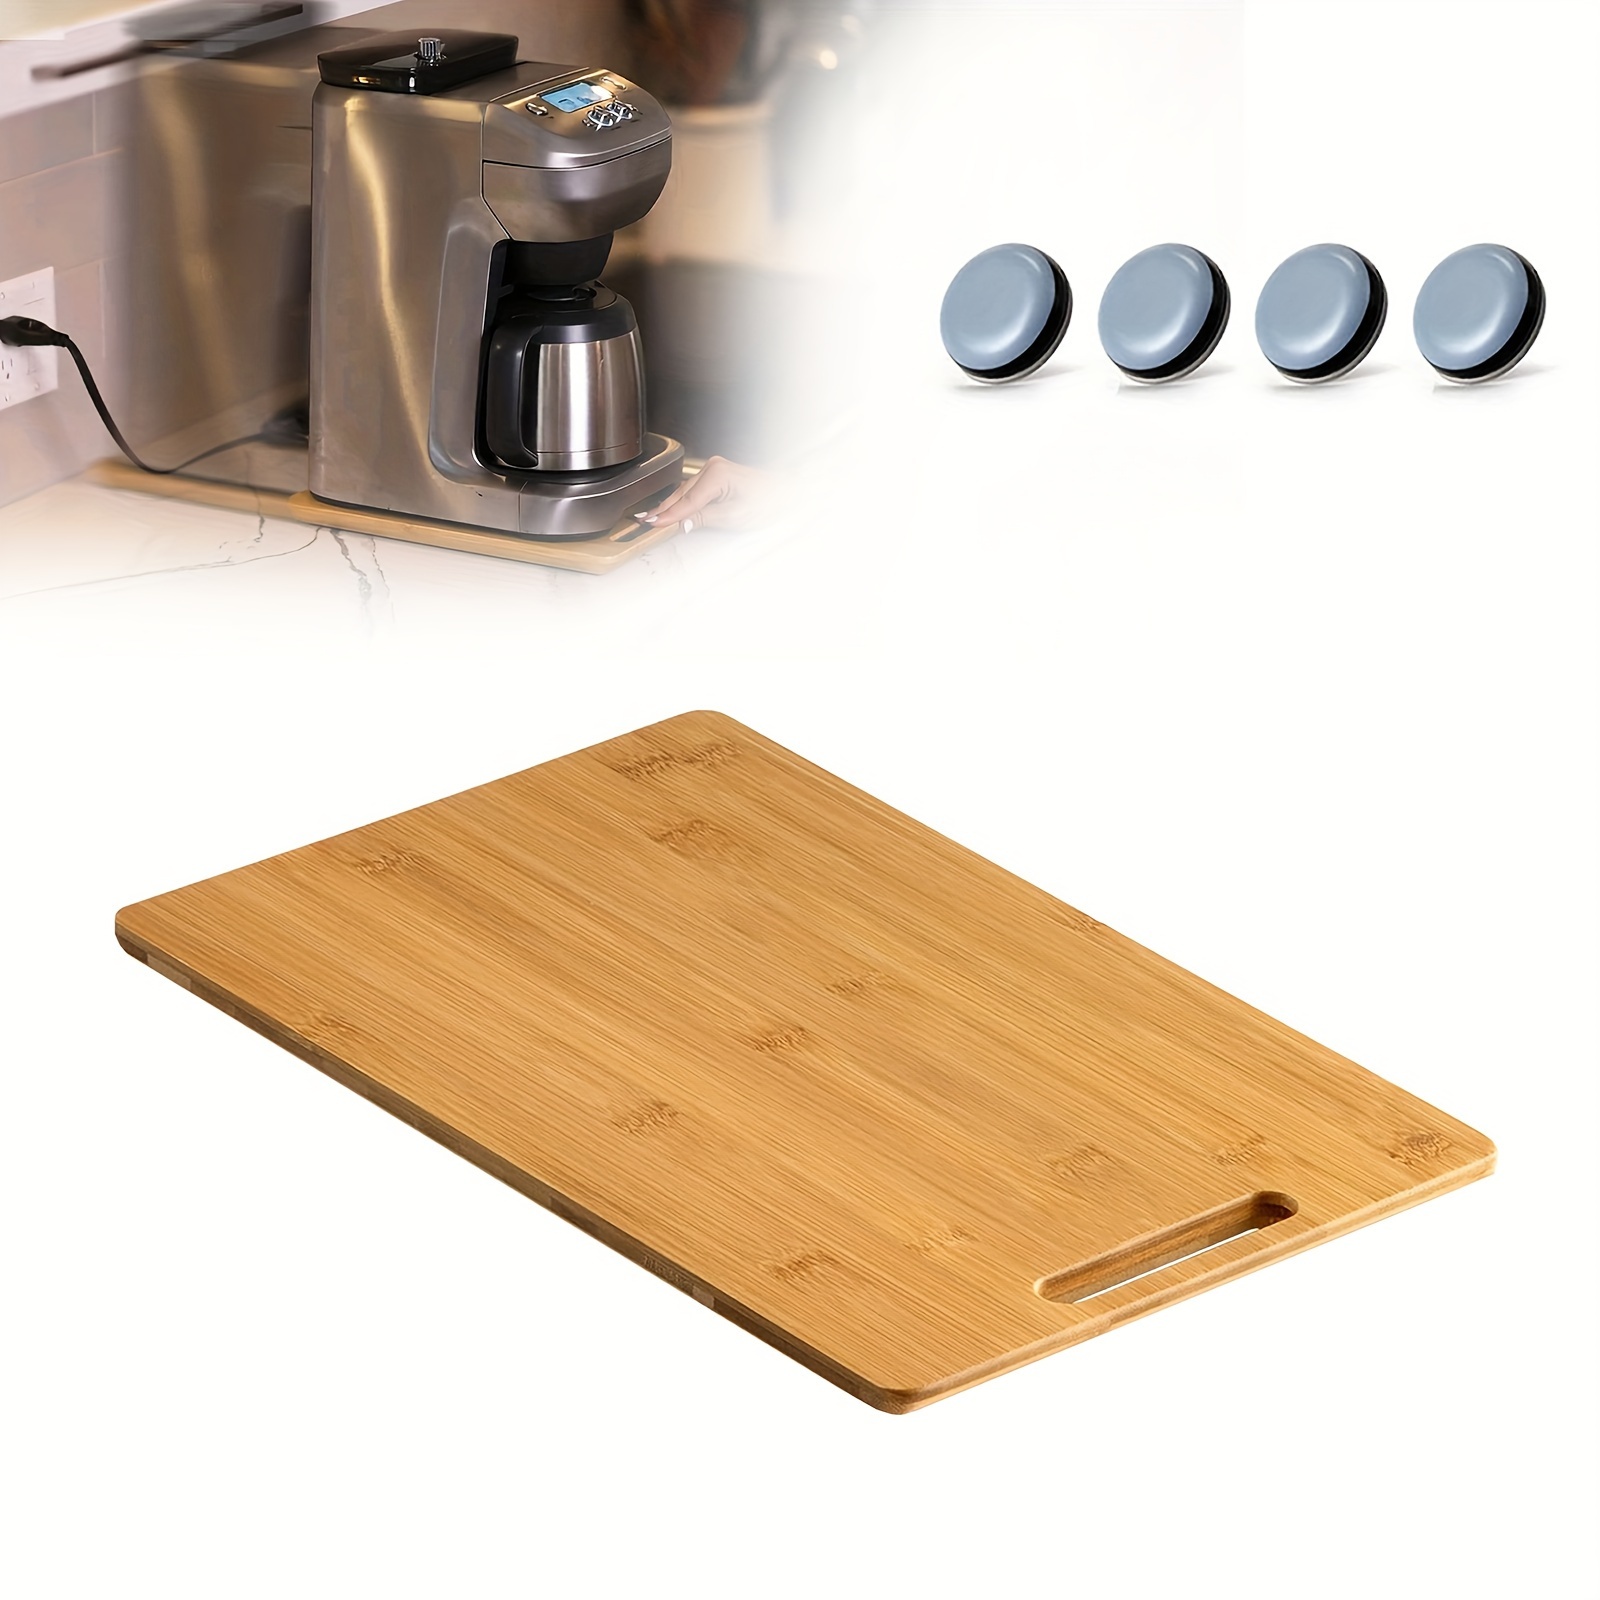 Bamboo Appliance Sliders for Kitchen Small Appliances - Counter